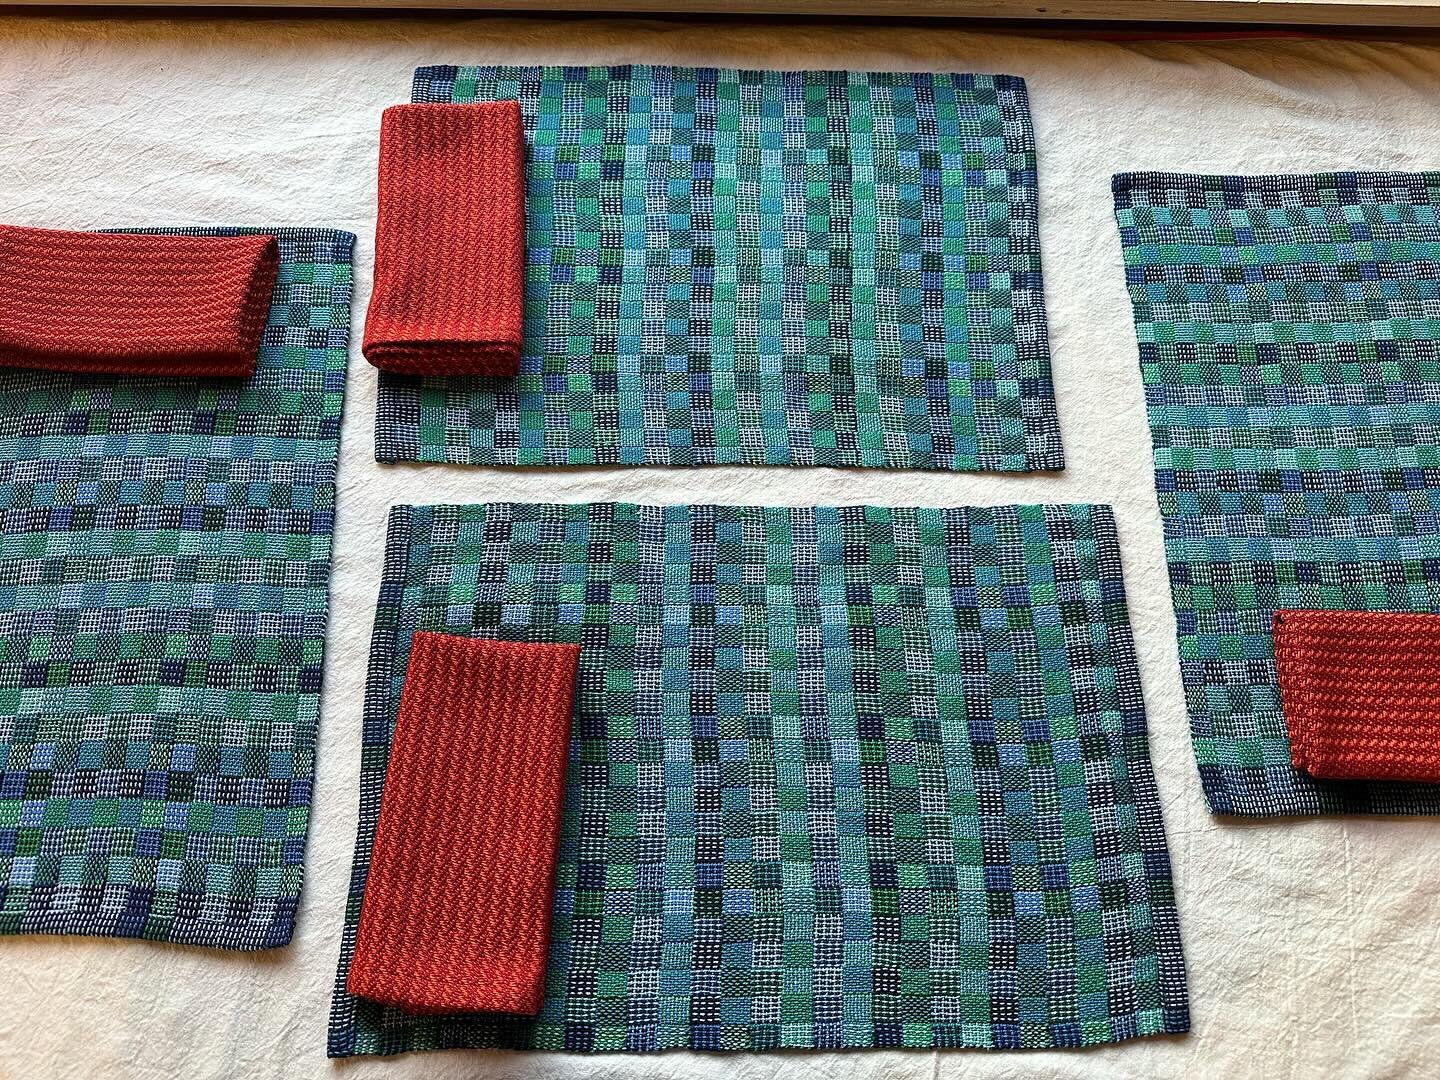 Now gracing a table in Pennsylvania. I was given free rein to make a set of placemats and napkins for a customer to give to a newly married couple. Factors driving color and design choices were:

Husband likes blues and greens.

Wife grew up in Texas